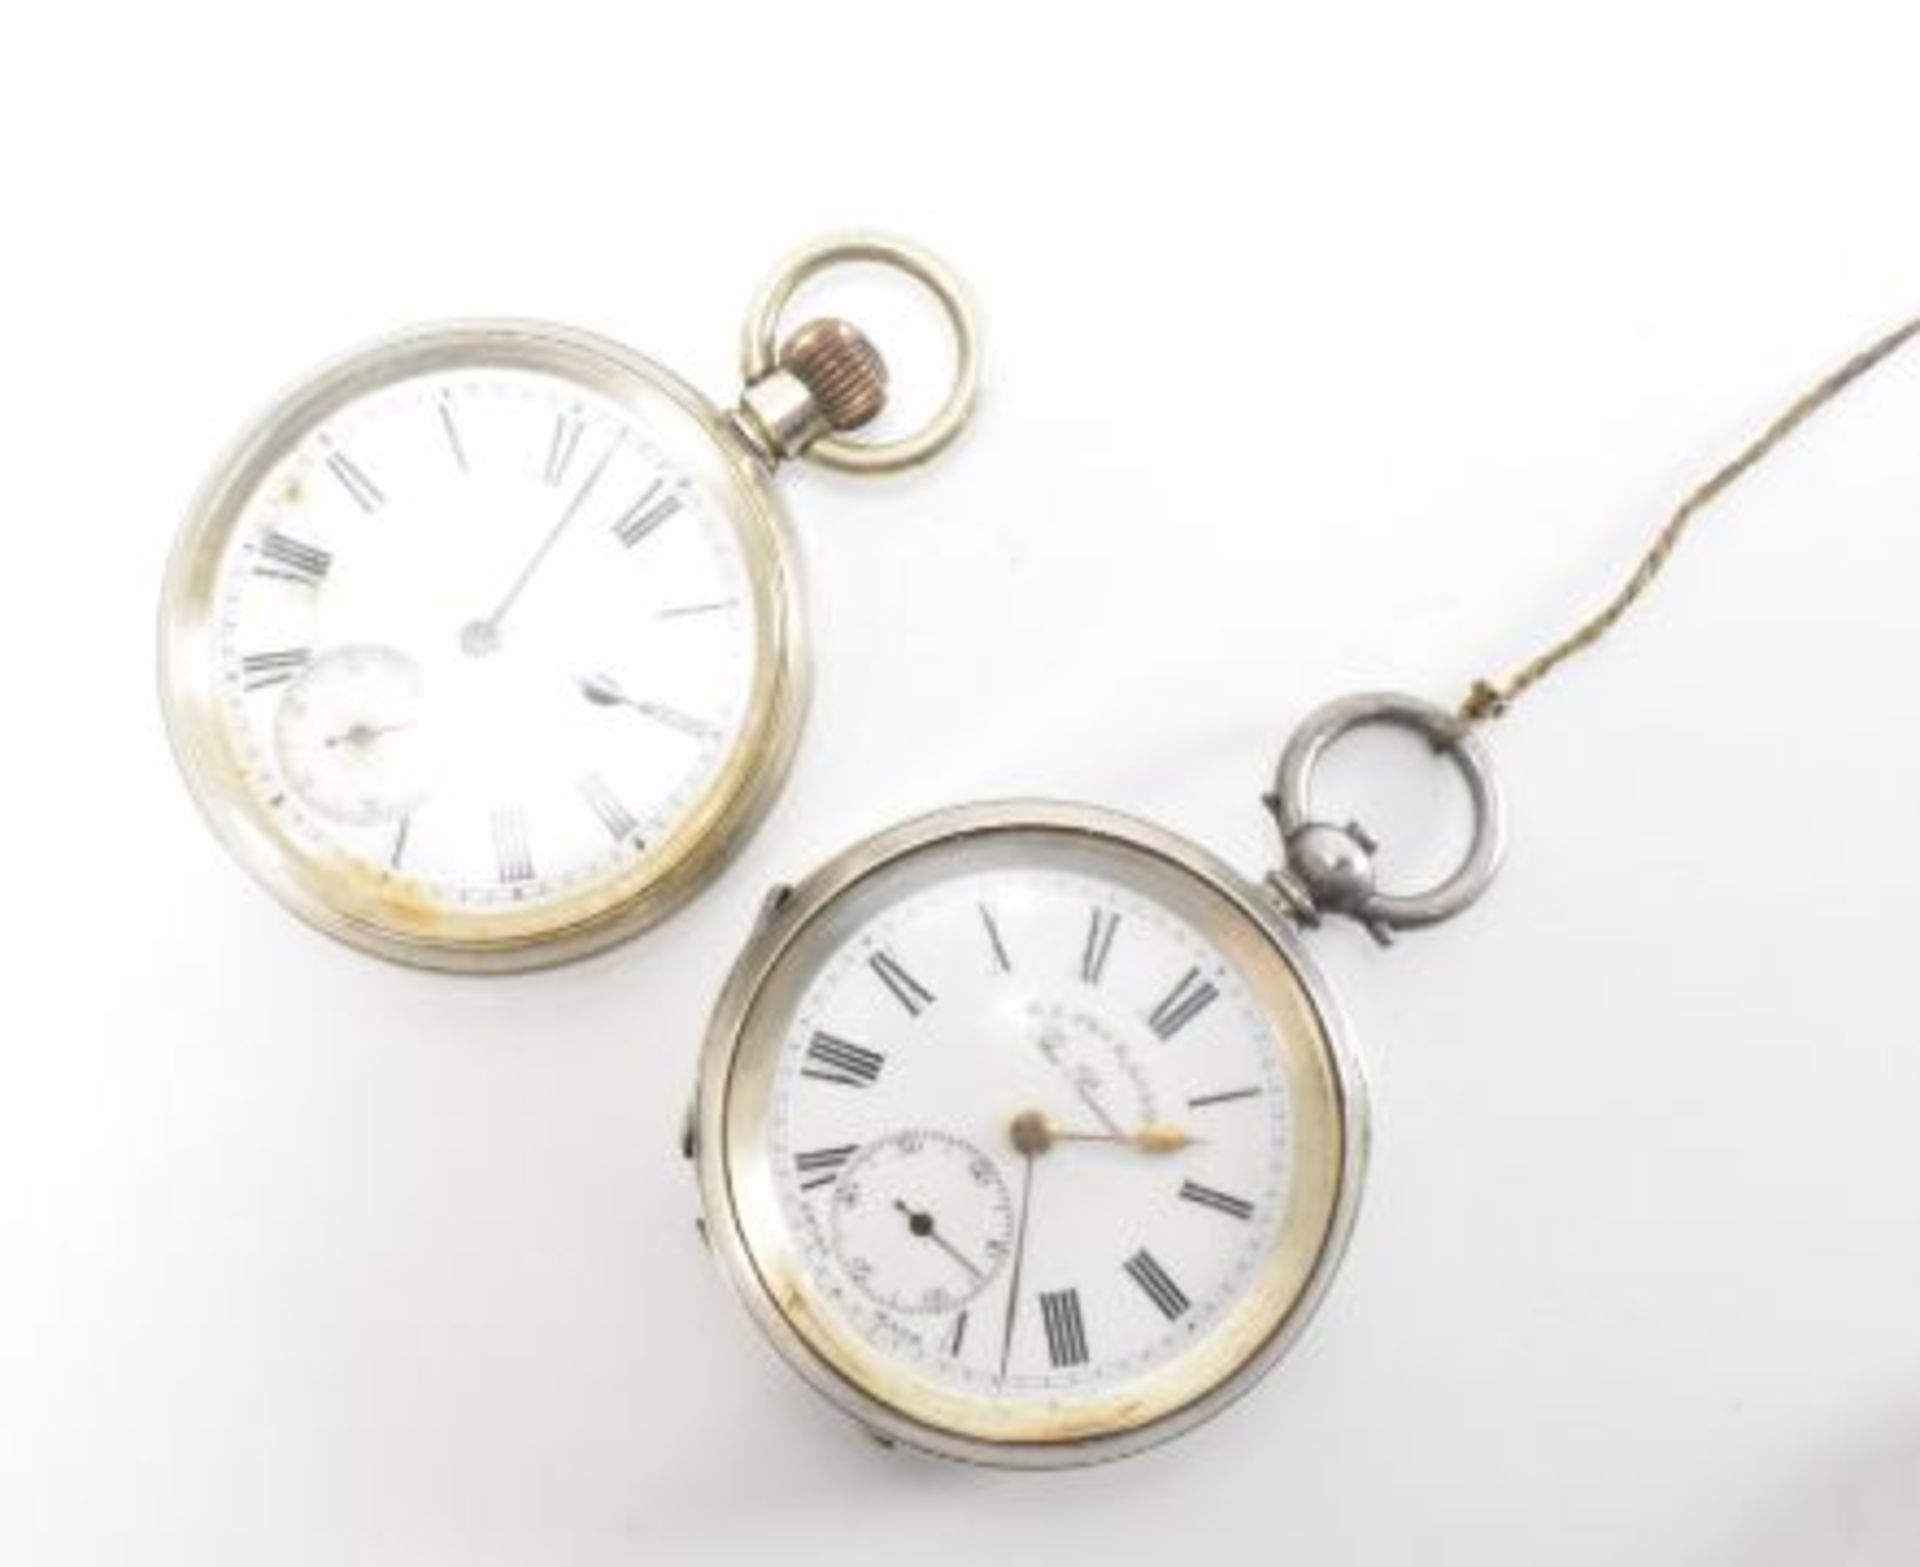 TWO POCKET WATCHES - HE PECK & LABRADOR - Image 6 of 6